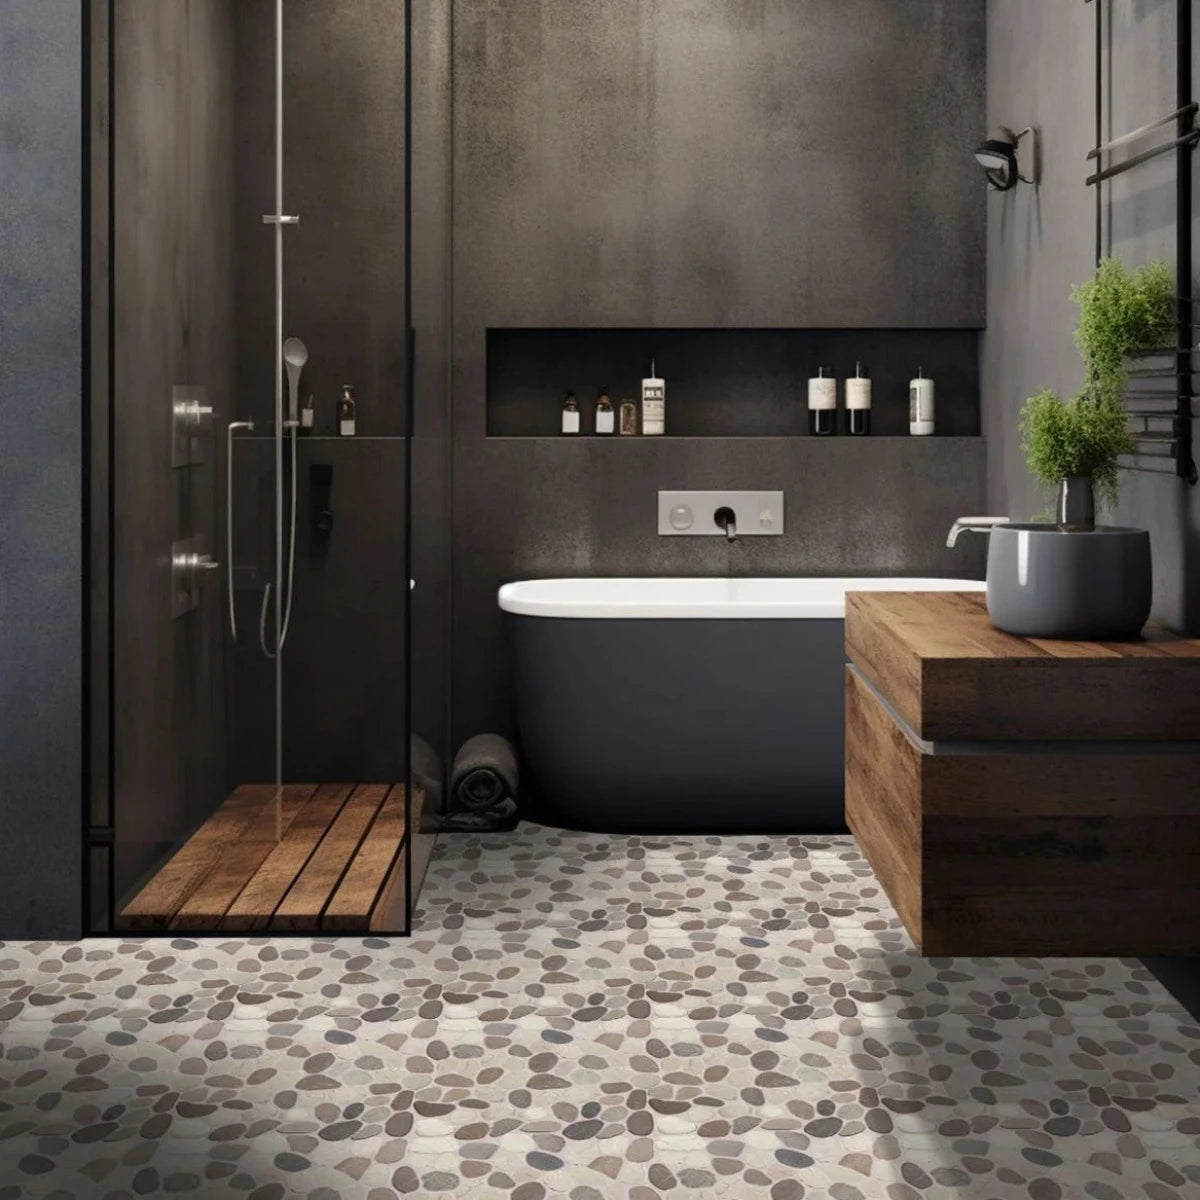 Capucino pebble tile flooring in dark bathroom surrounded by shower and toilet